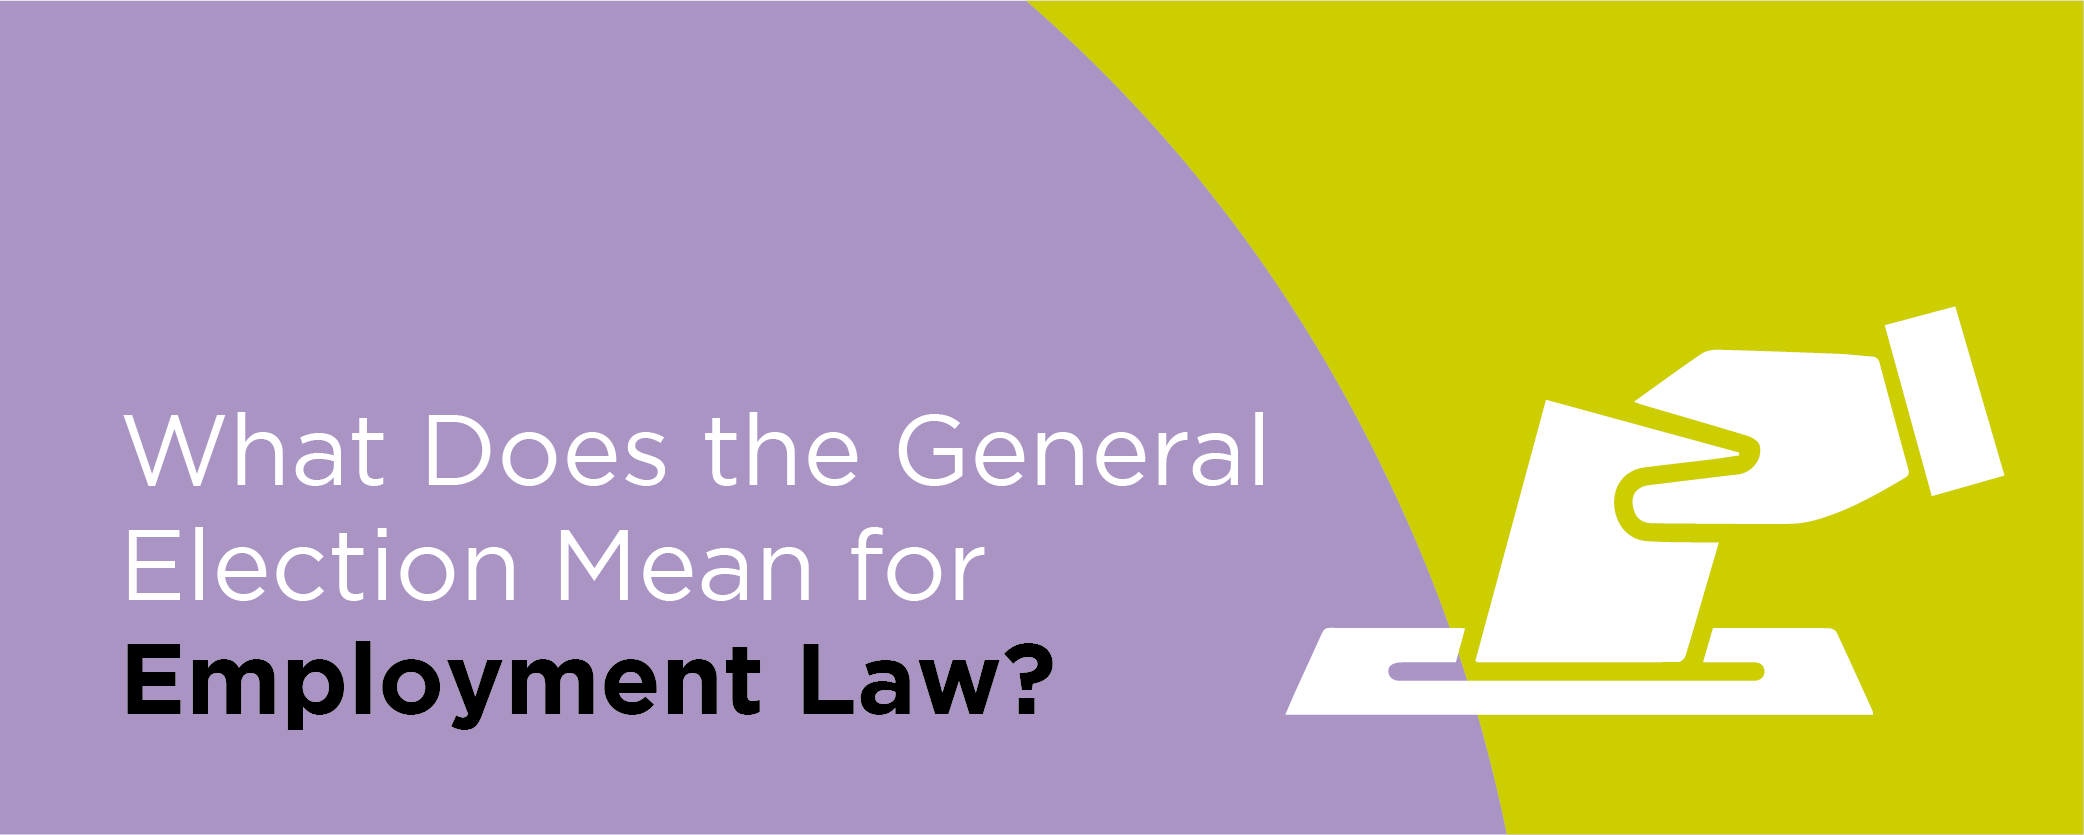 What does the general election mean for employment law?